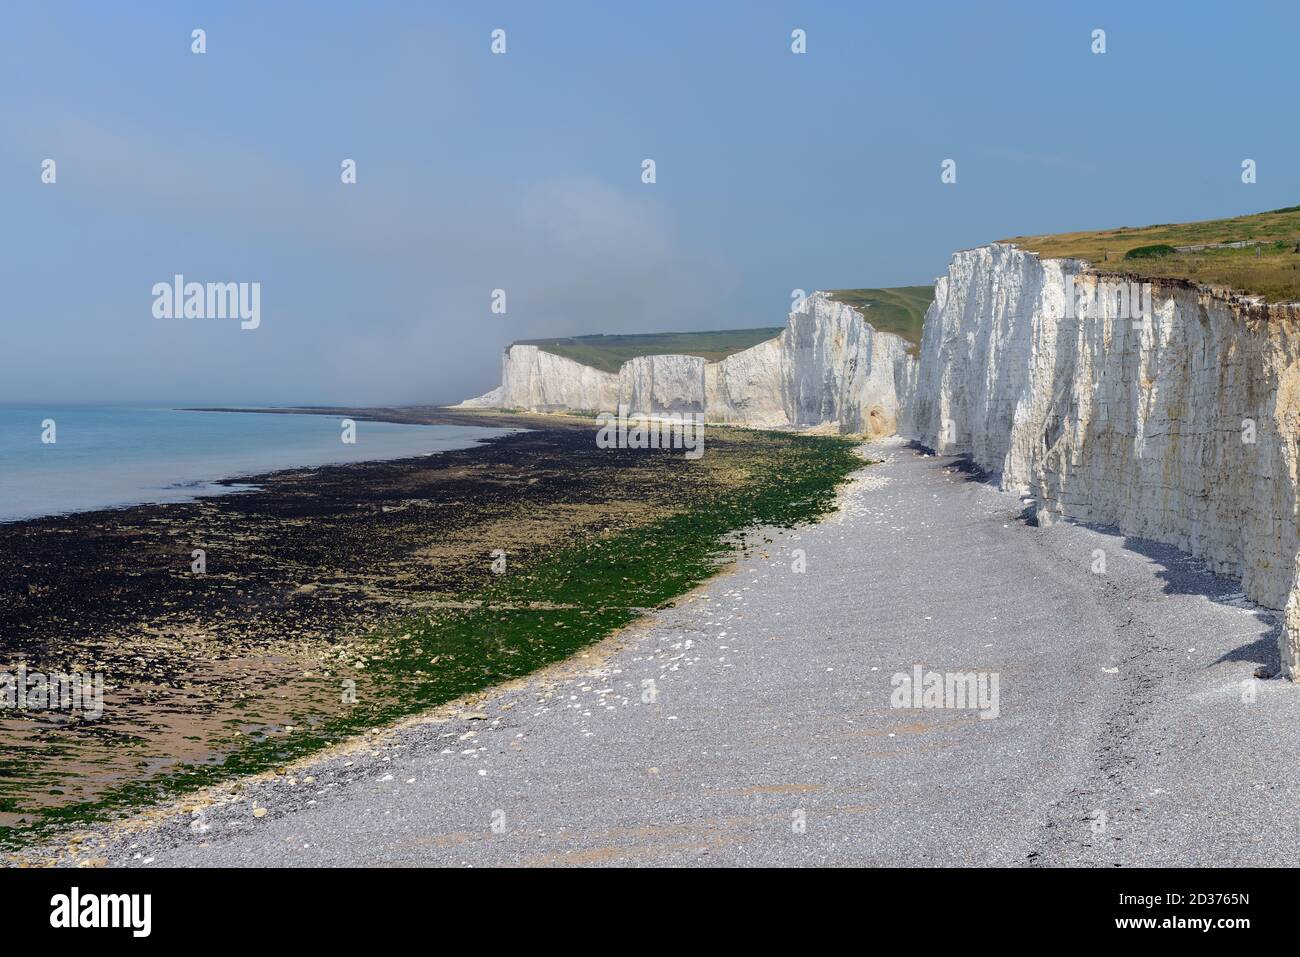 The Seven Sisters are a series of chalk cliffs next to the English Channel. They are part of the South Downs National Park in East Sussex, Stock Photo